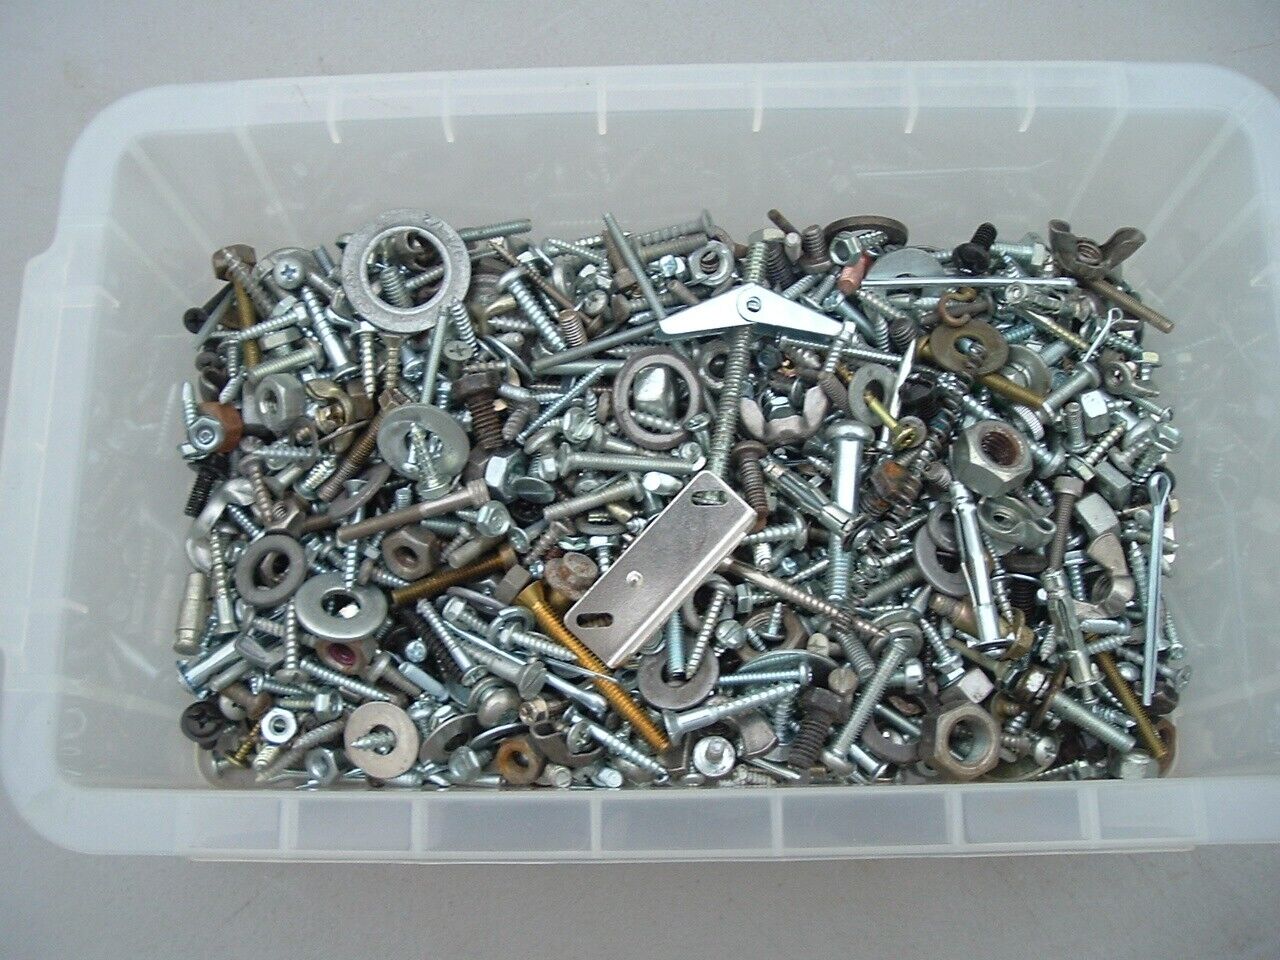 10 Lbs Assorted Screws Steel Hardware Vintage Bolts Fasteners Washers Hooks Nuts